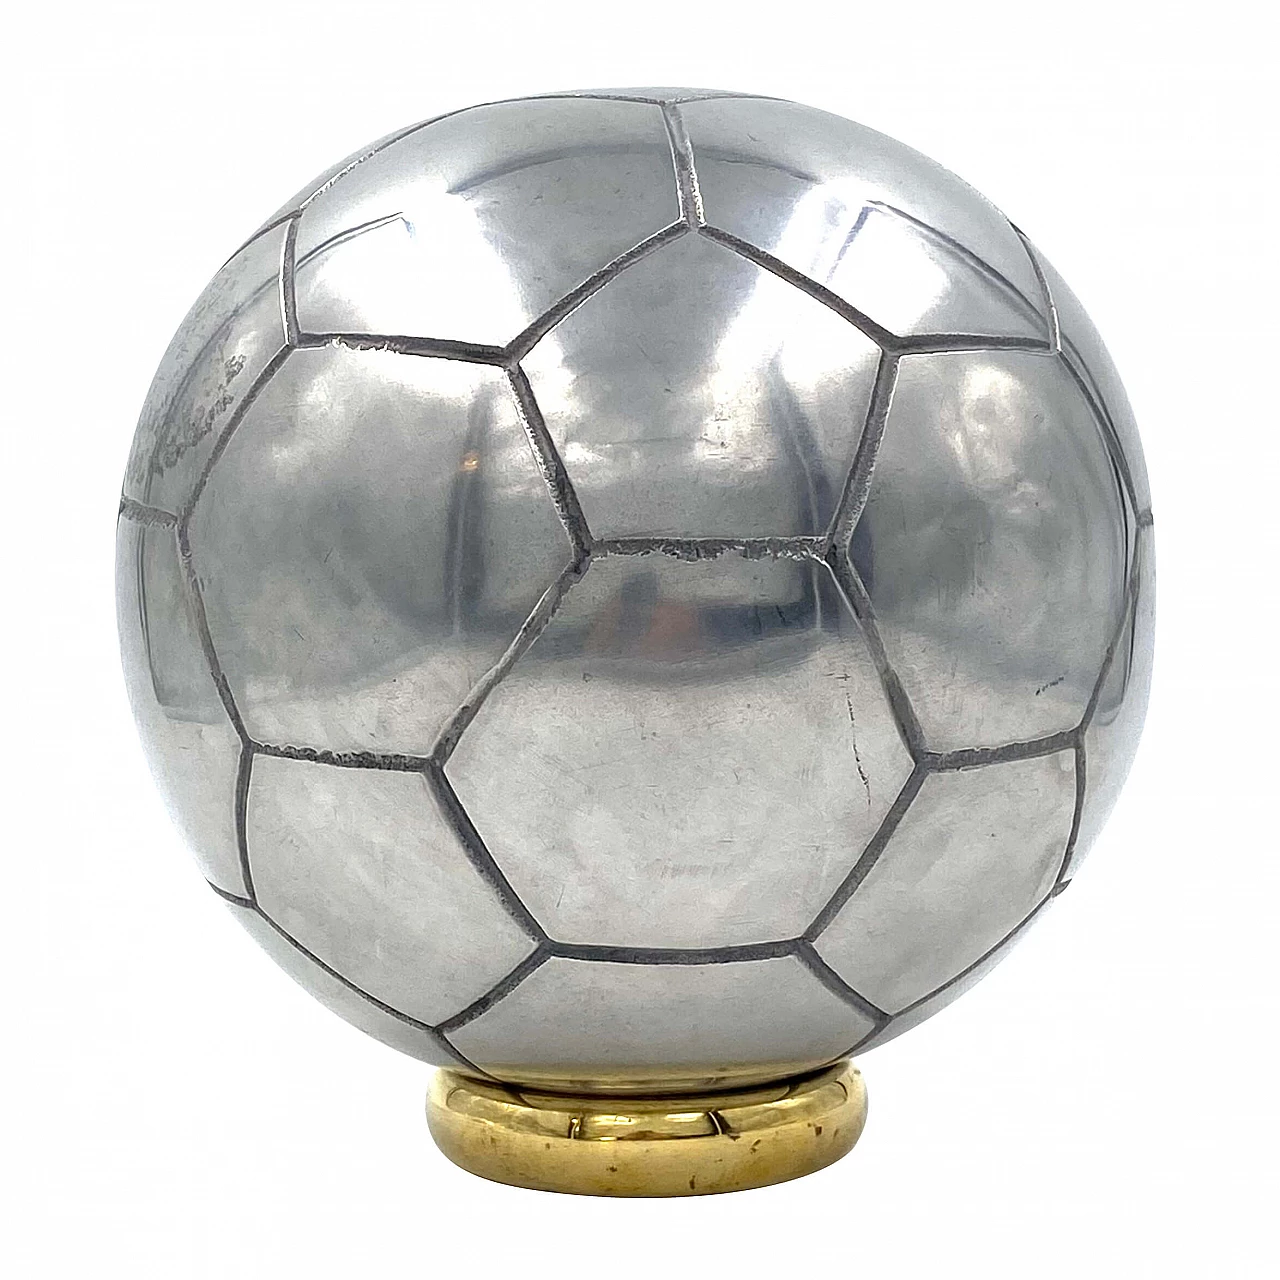 Sculpture of soccer ball in polished aluminum, of '900 1260559